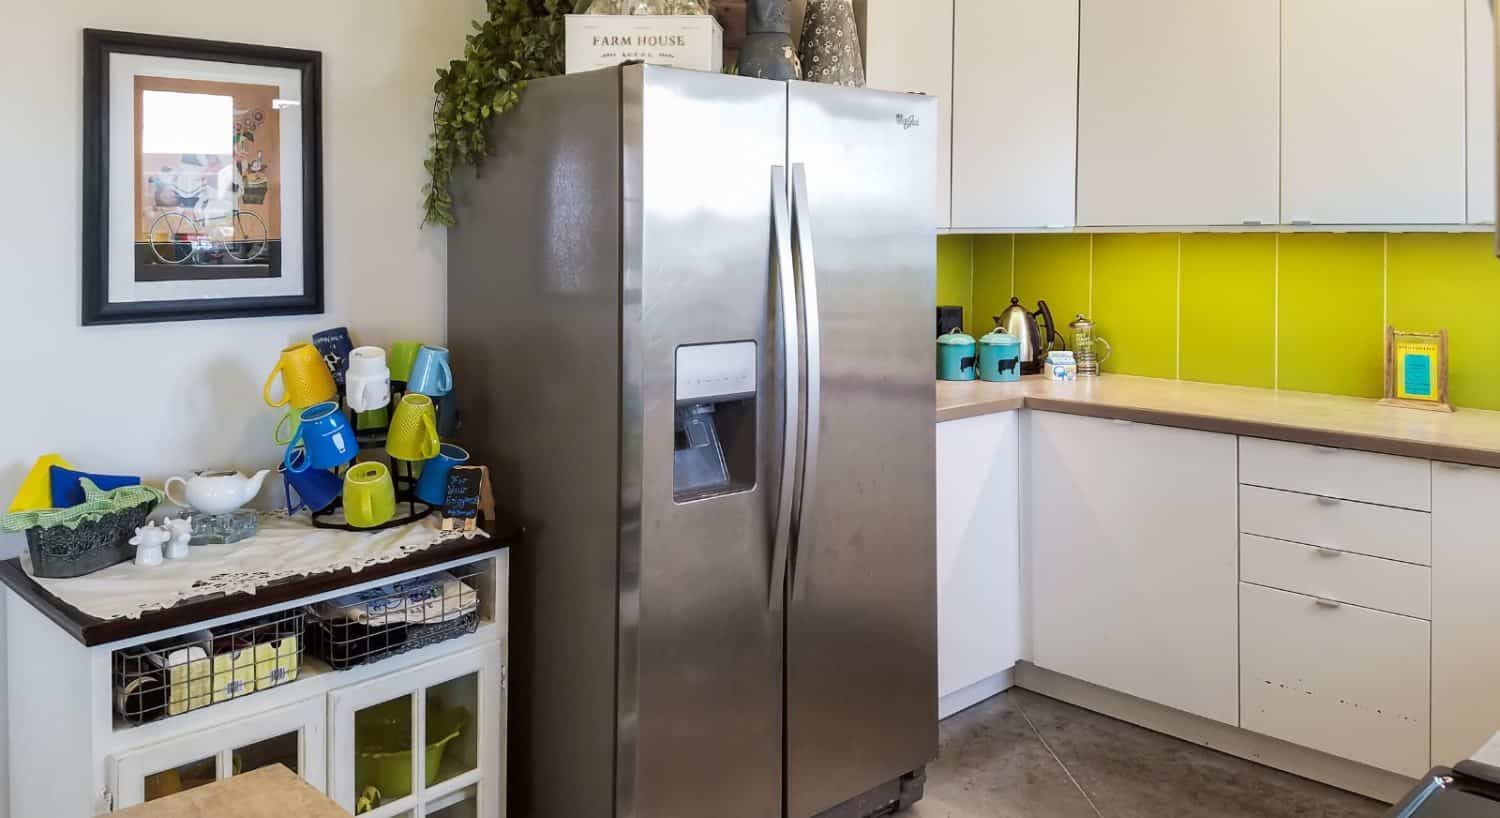 Kitchen with white walls, white cabinets, green backsplash, and stainless steel refridgerator